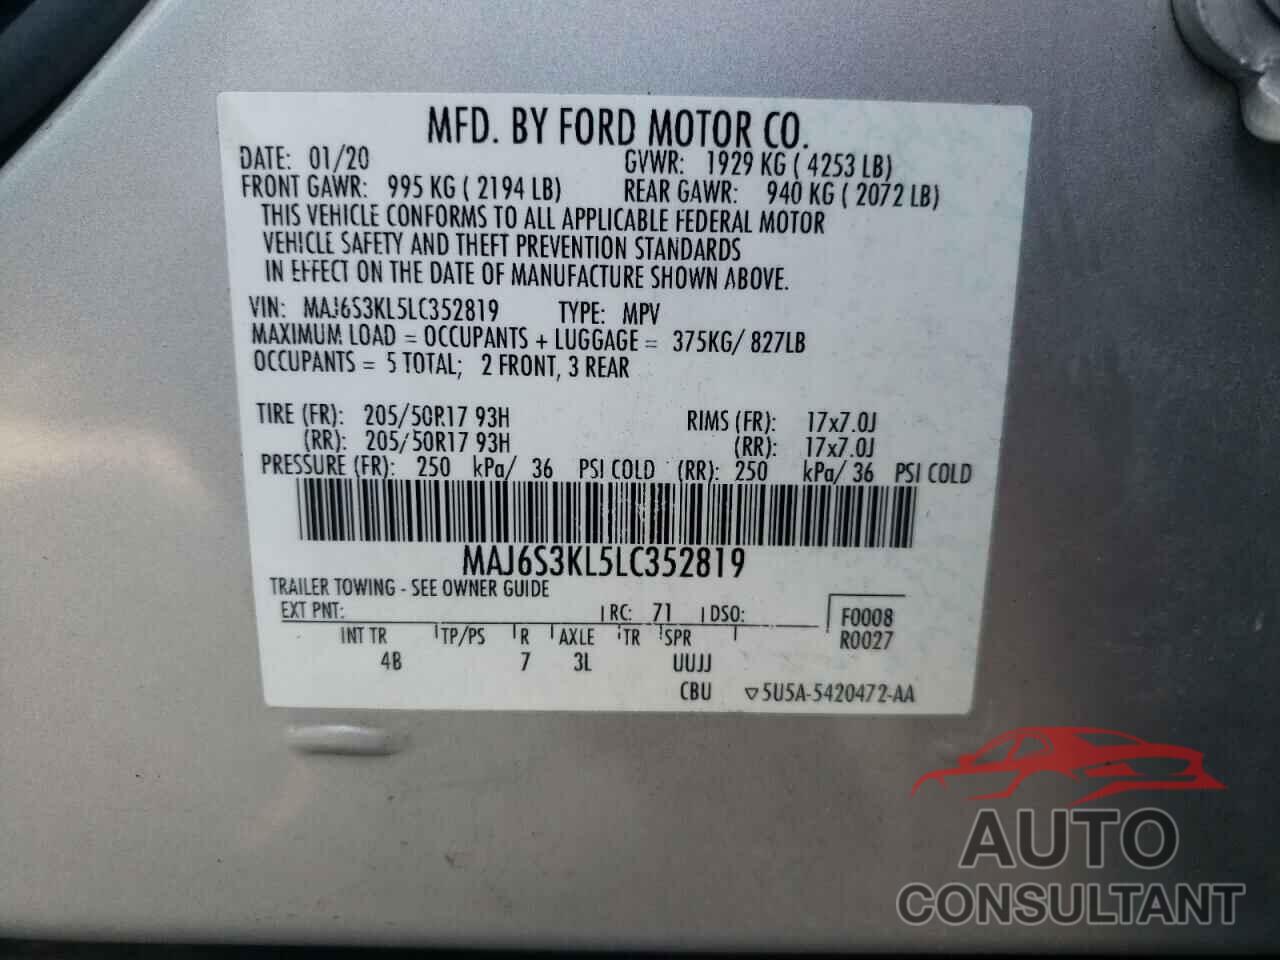 FORD ALL OTHER 2020 - MAJ6S3KL5LC352819